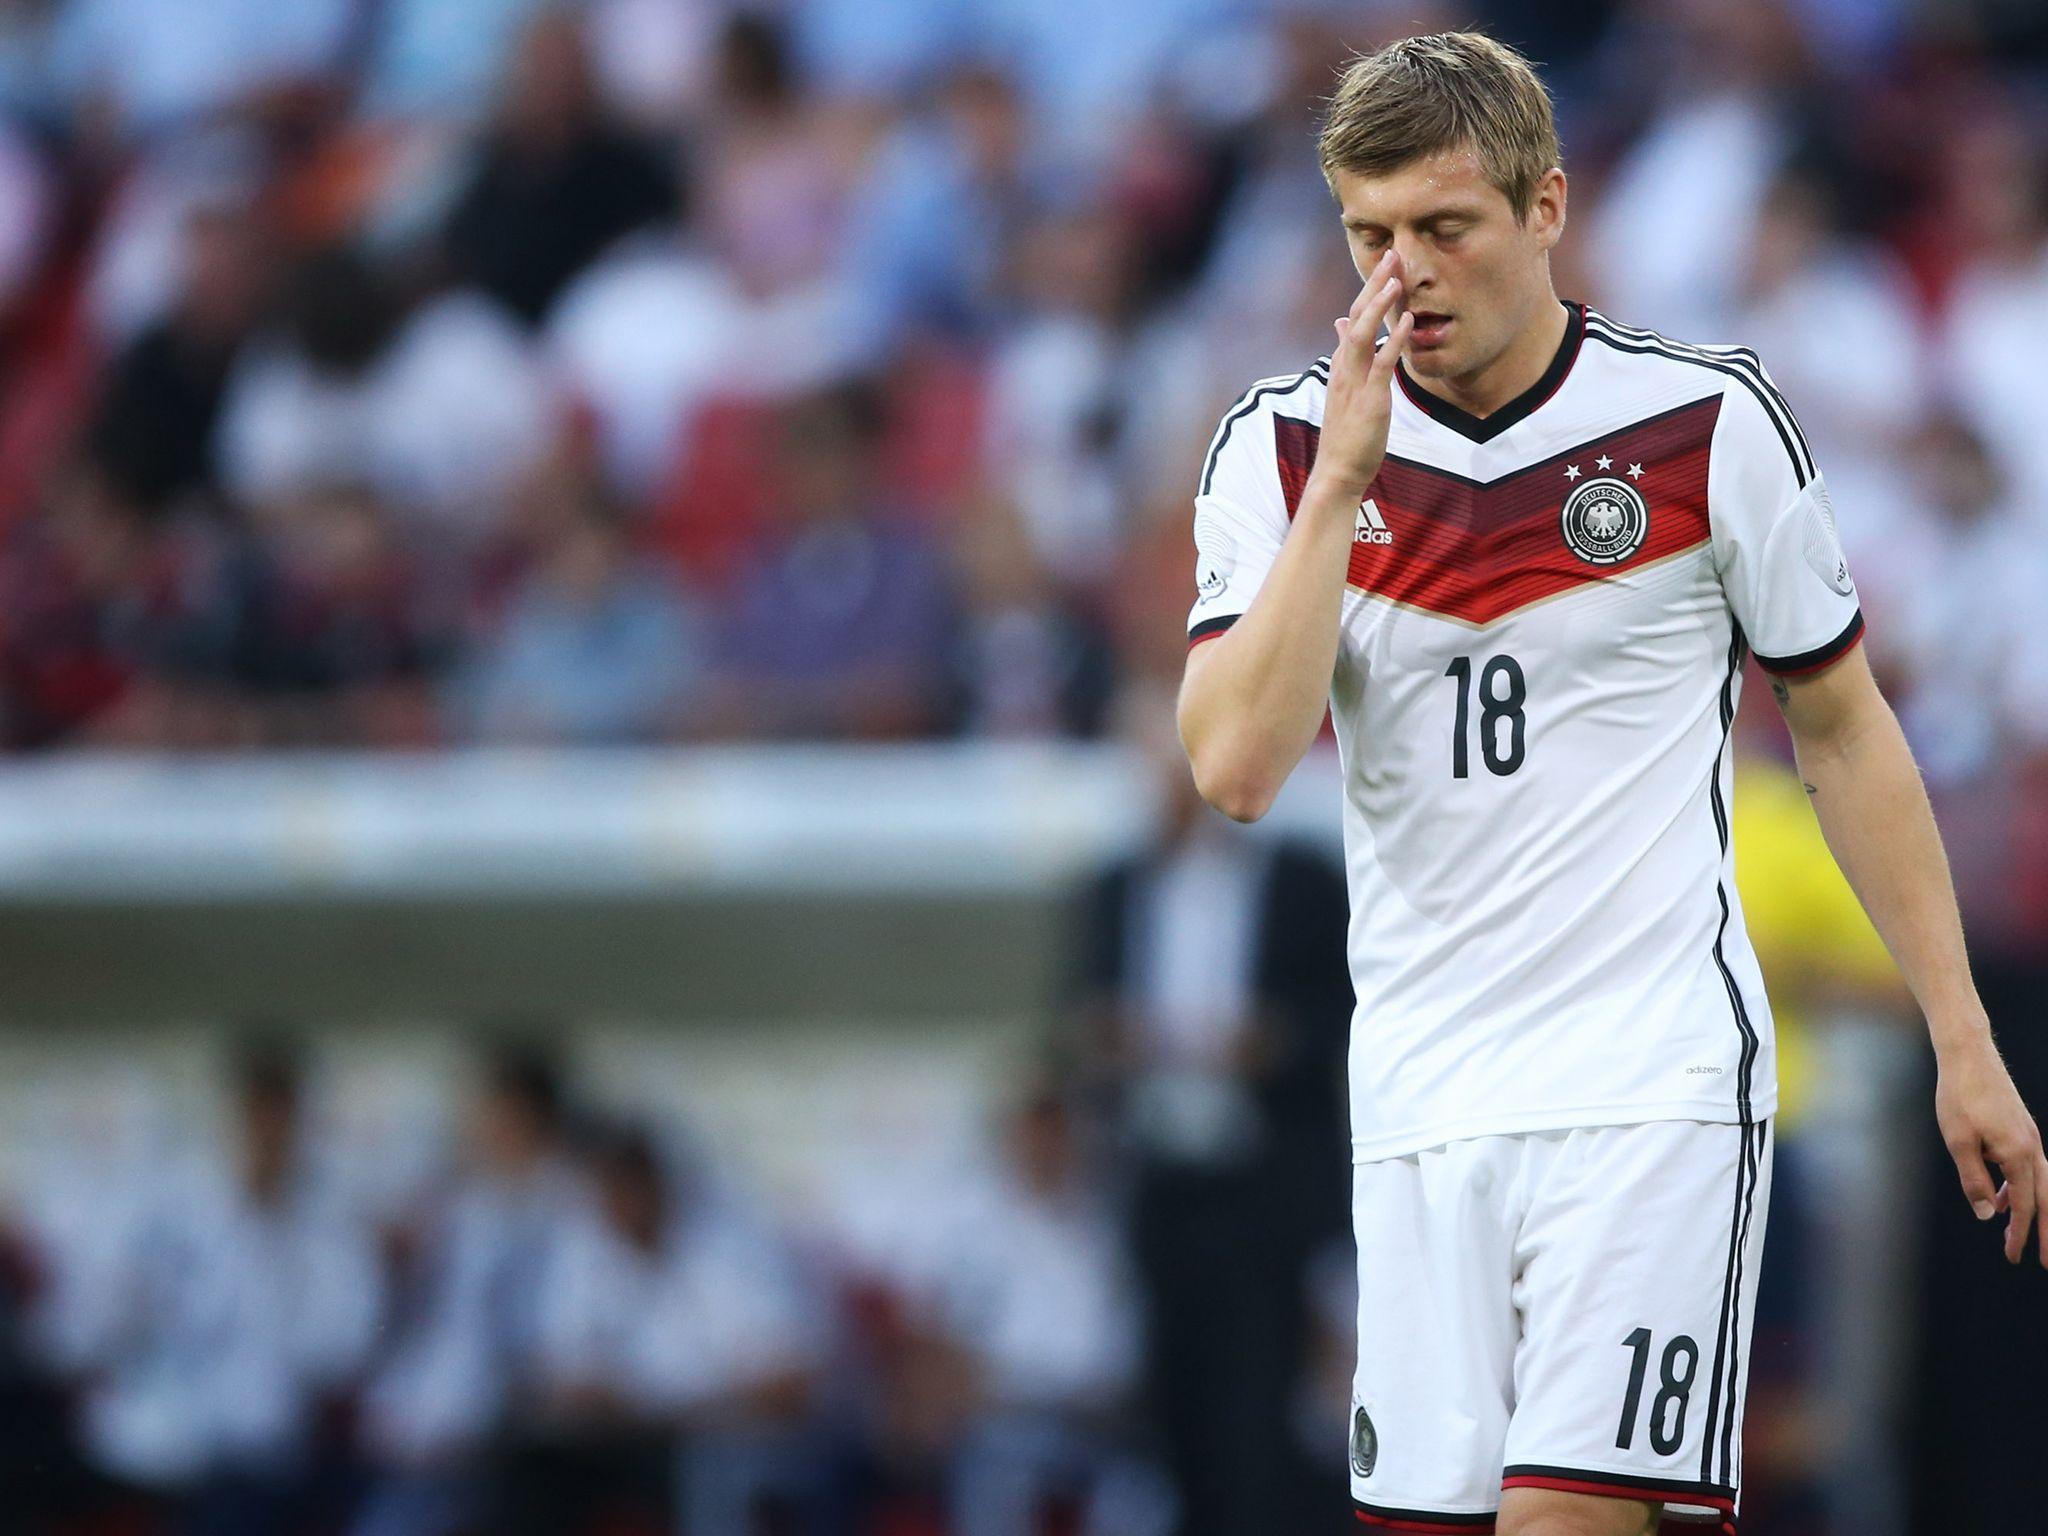 Toni Kroos Wallpaper High Resolution and Quality Download